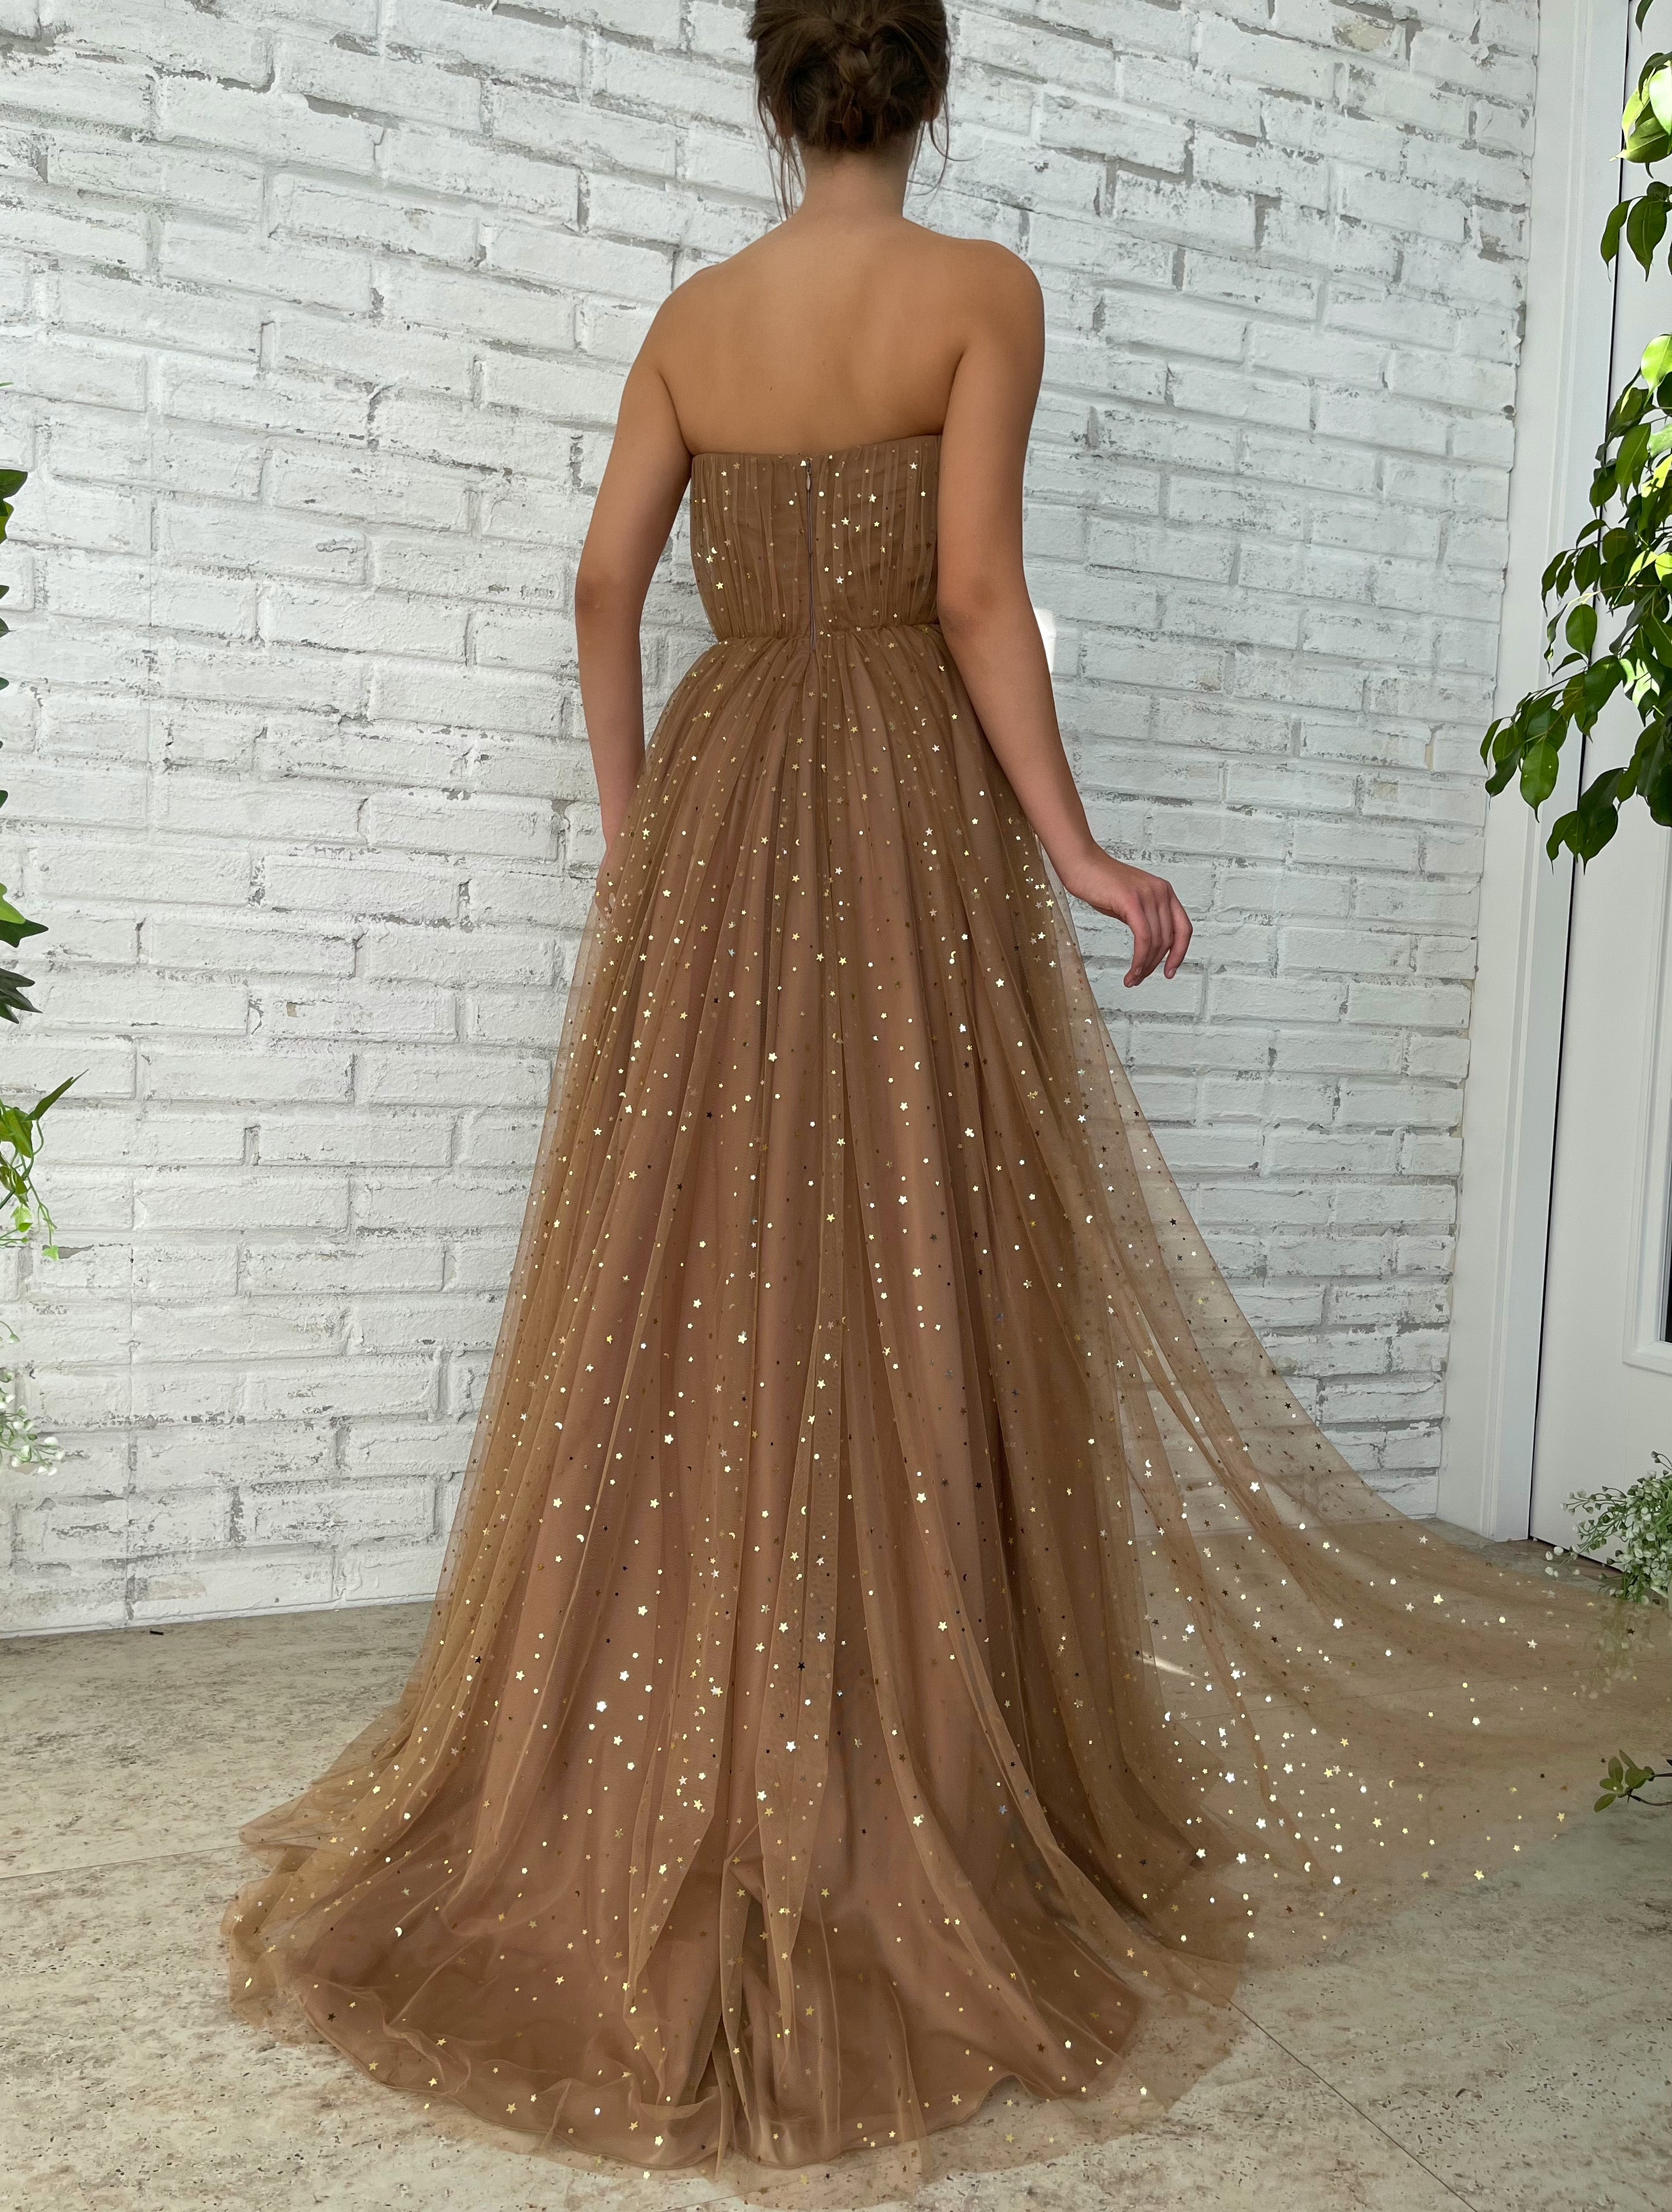 Brown A-Line dress with no sleeves and starry fabric